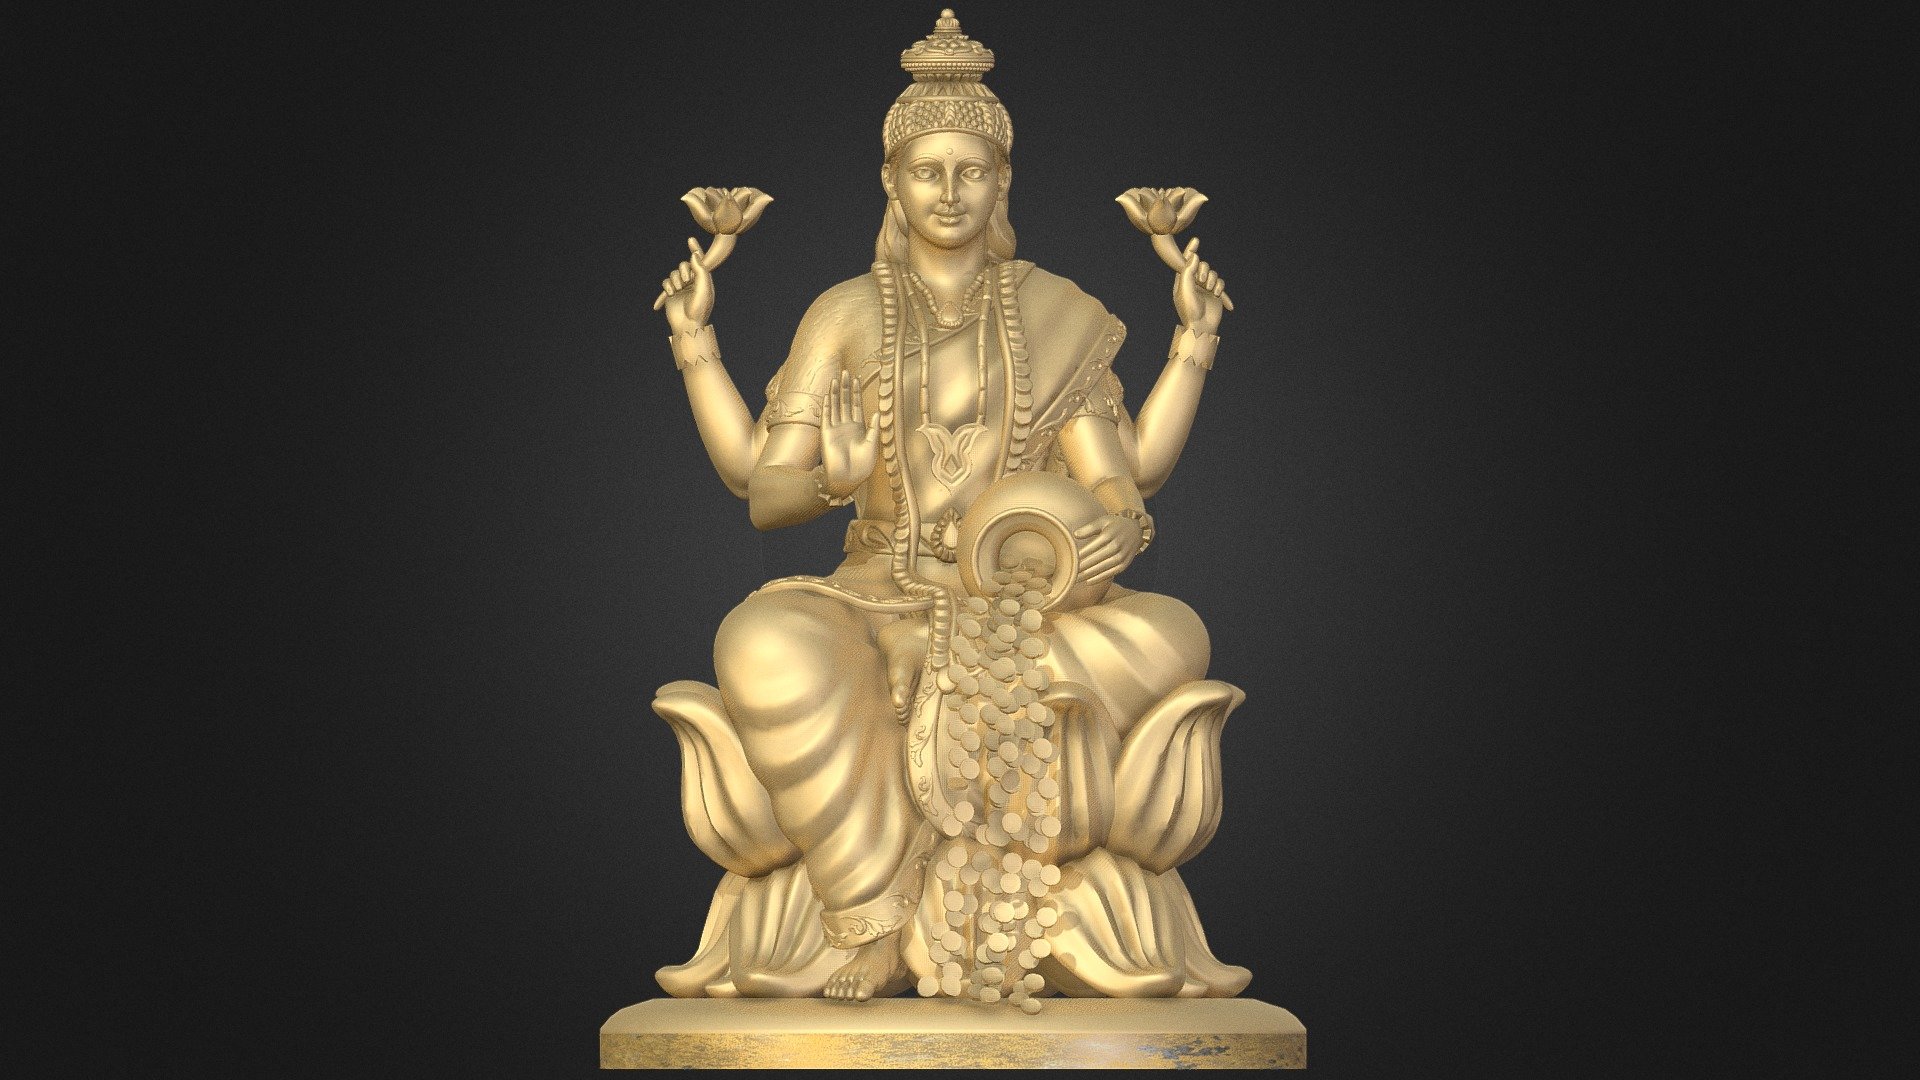 She is the goddess of wealth, fortune, power, beauty, fertility and prosperity, and associated with Maya (&ldquo;Illusion